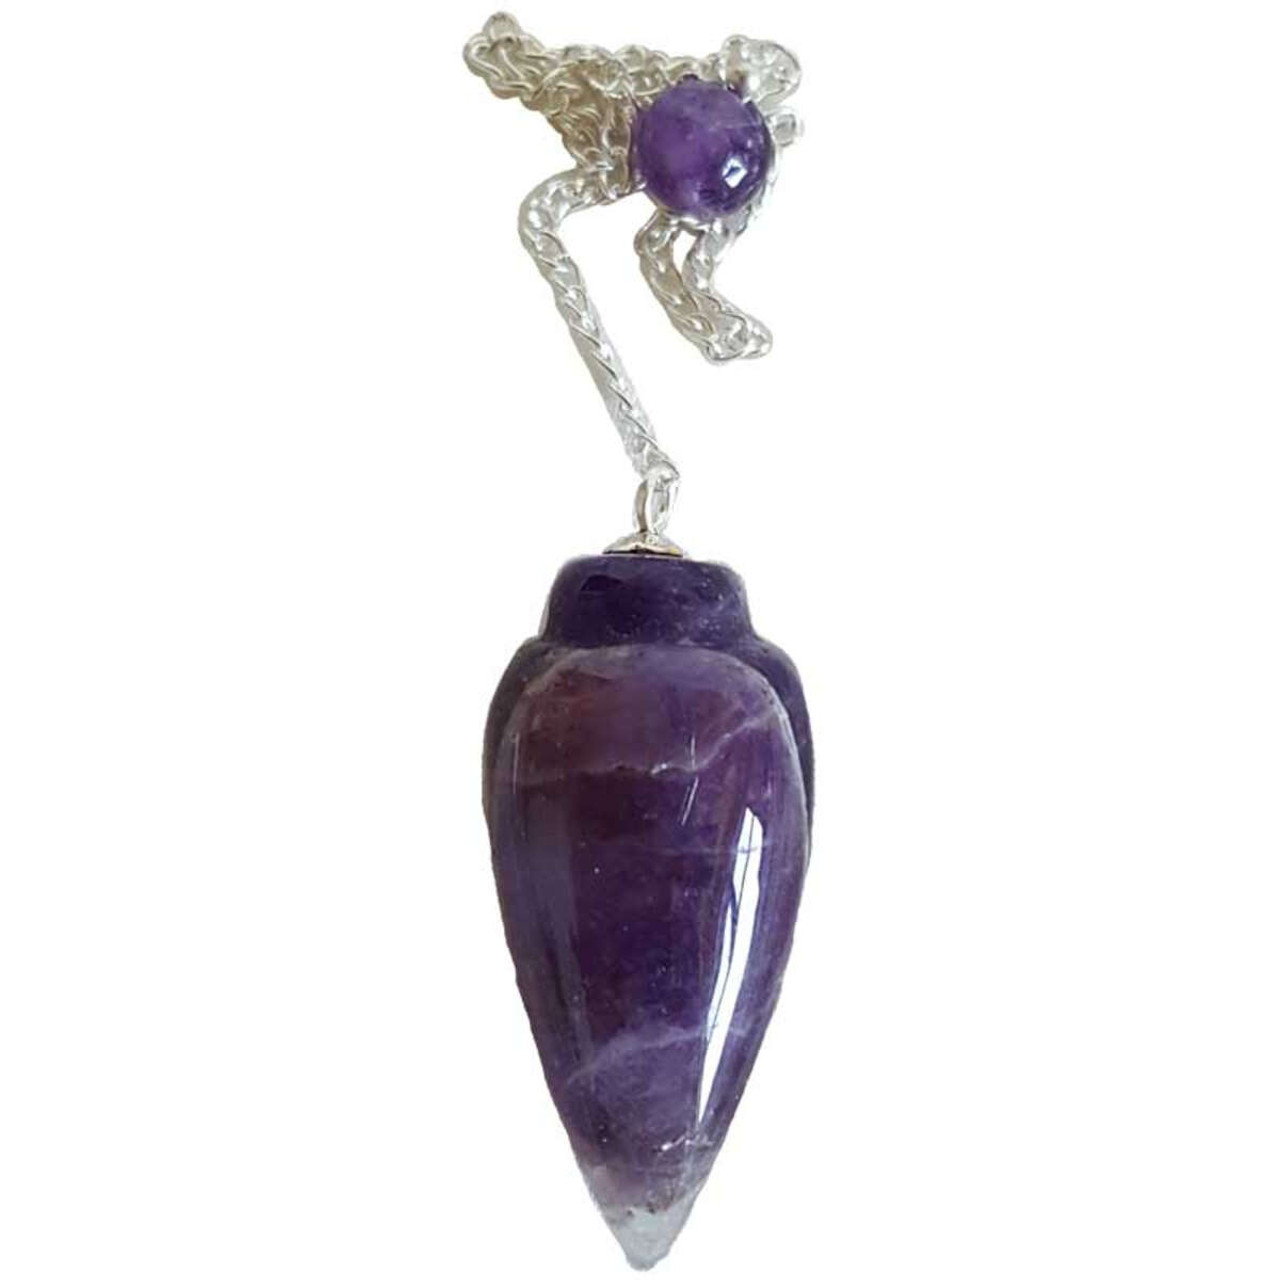 Amethyst Pendulum - The Ancient Sage Metaphysical Supply Store